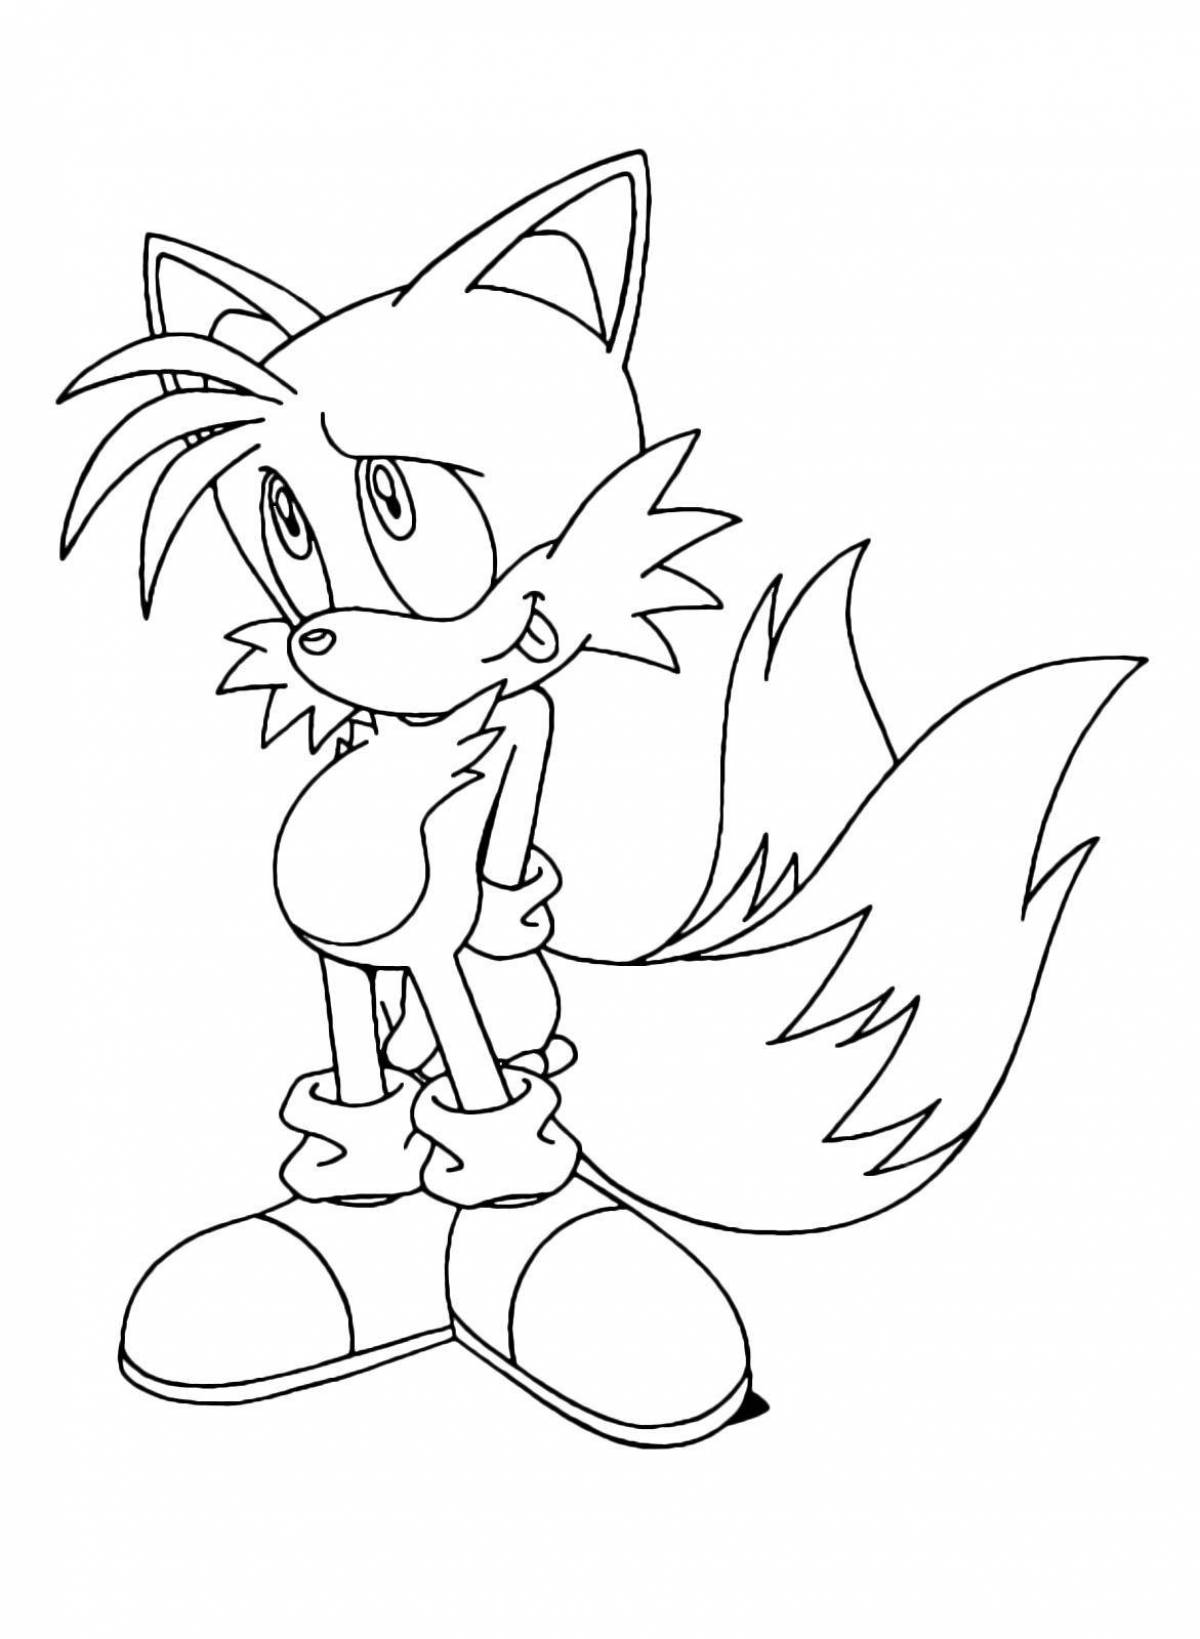 Playful sonic and tails coloring page